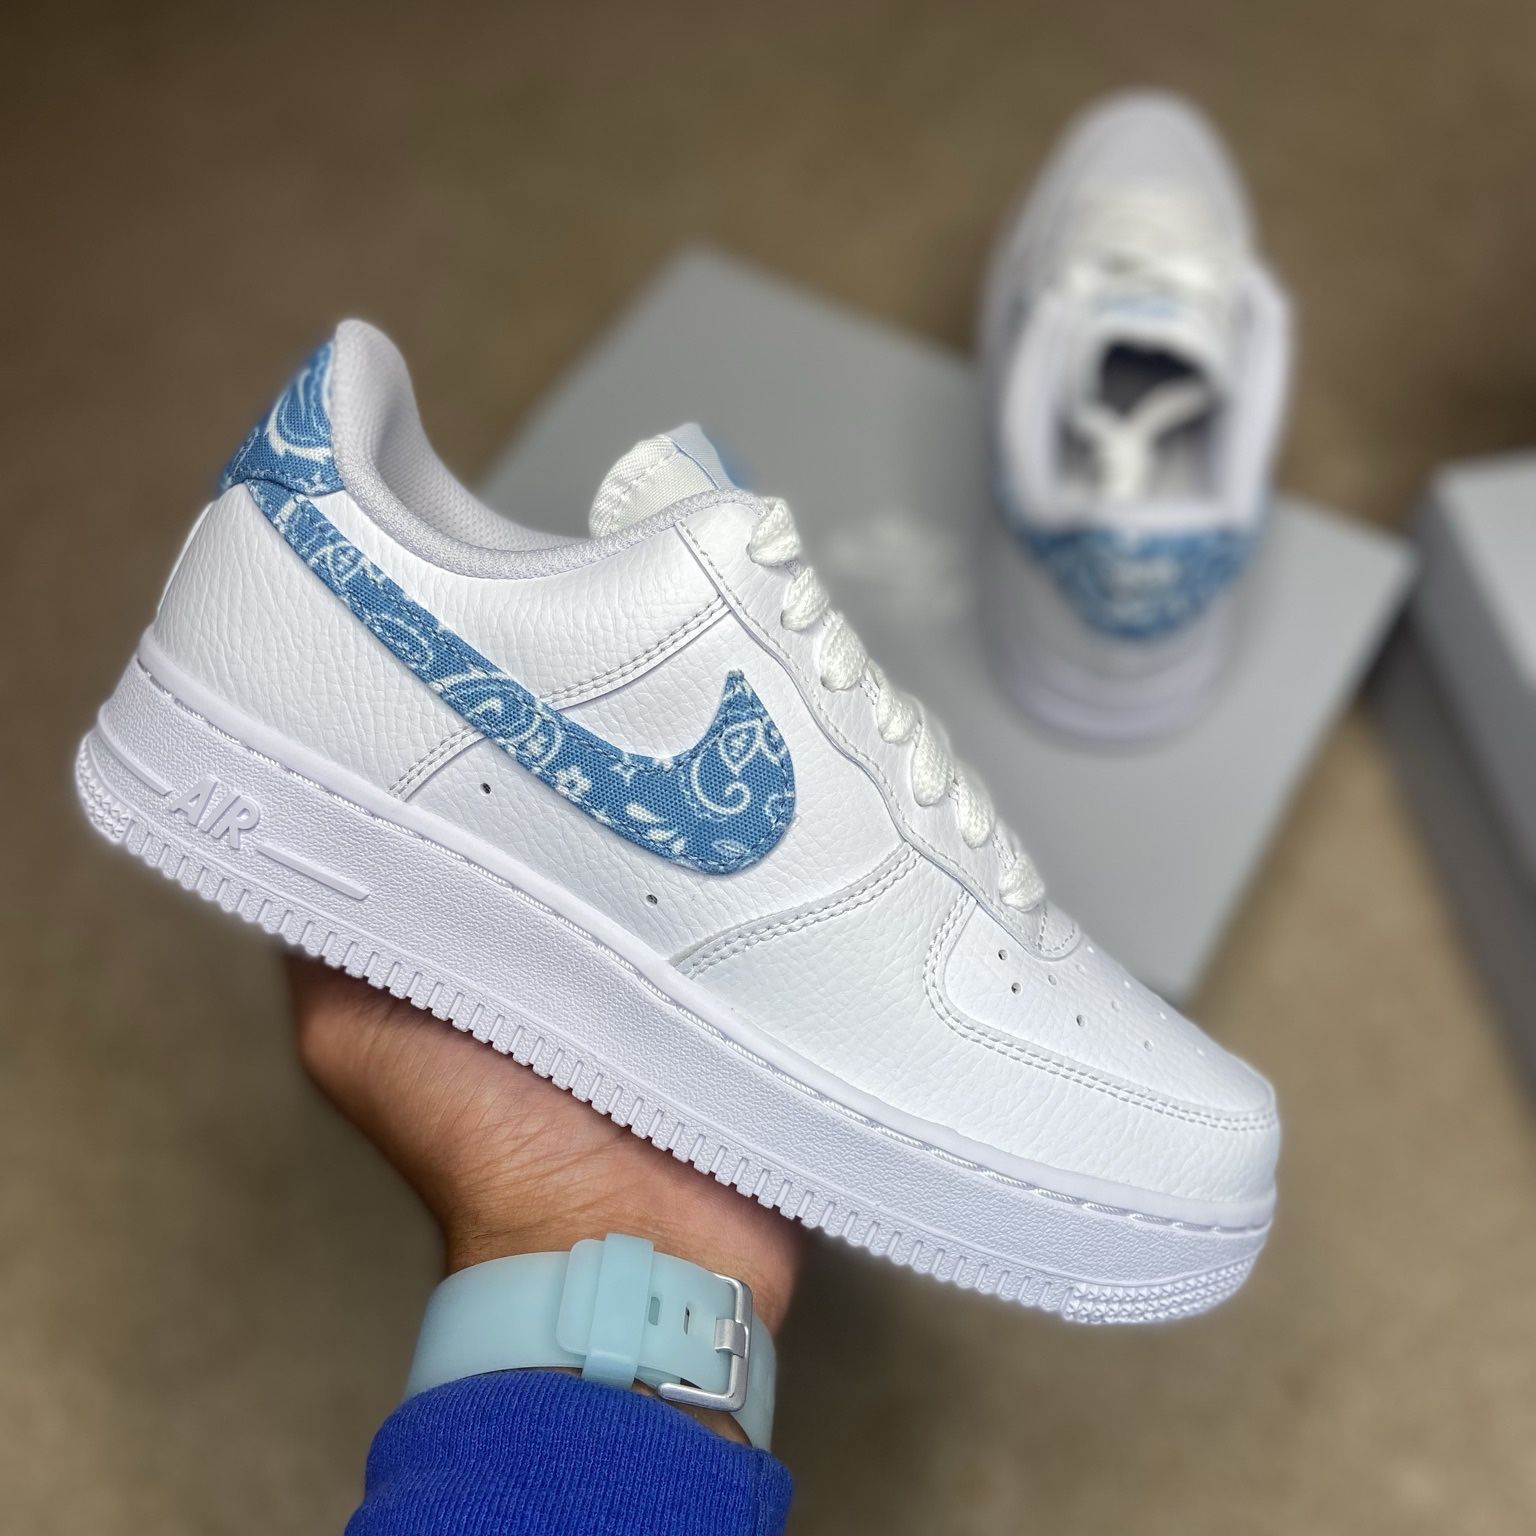 Nike Air Force 1 '07 LVL 8 for Sale in Hammond, IN - OfferUp